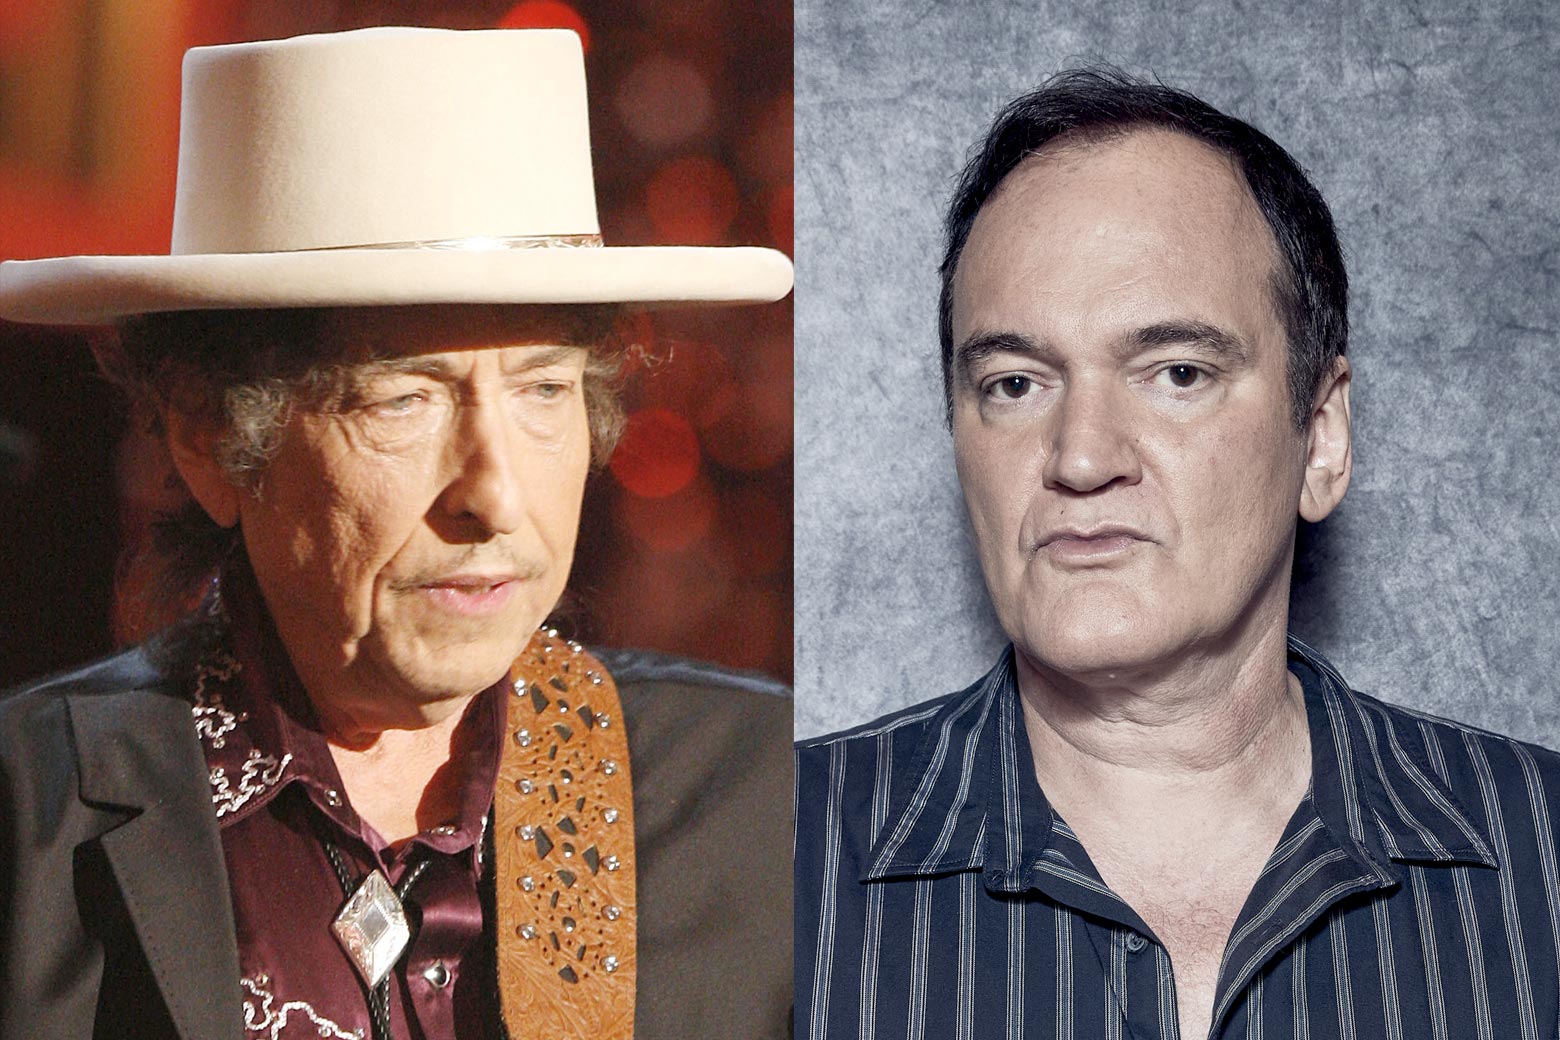 Bob Dylan wears a beige hat and bolo tie and plays guitar; Quentin Tarantino against a dark background wearing a black pinstriped shirt. 